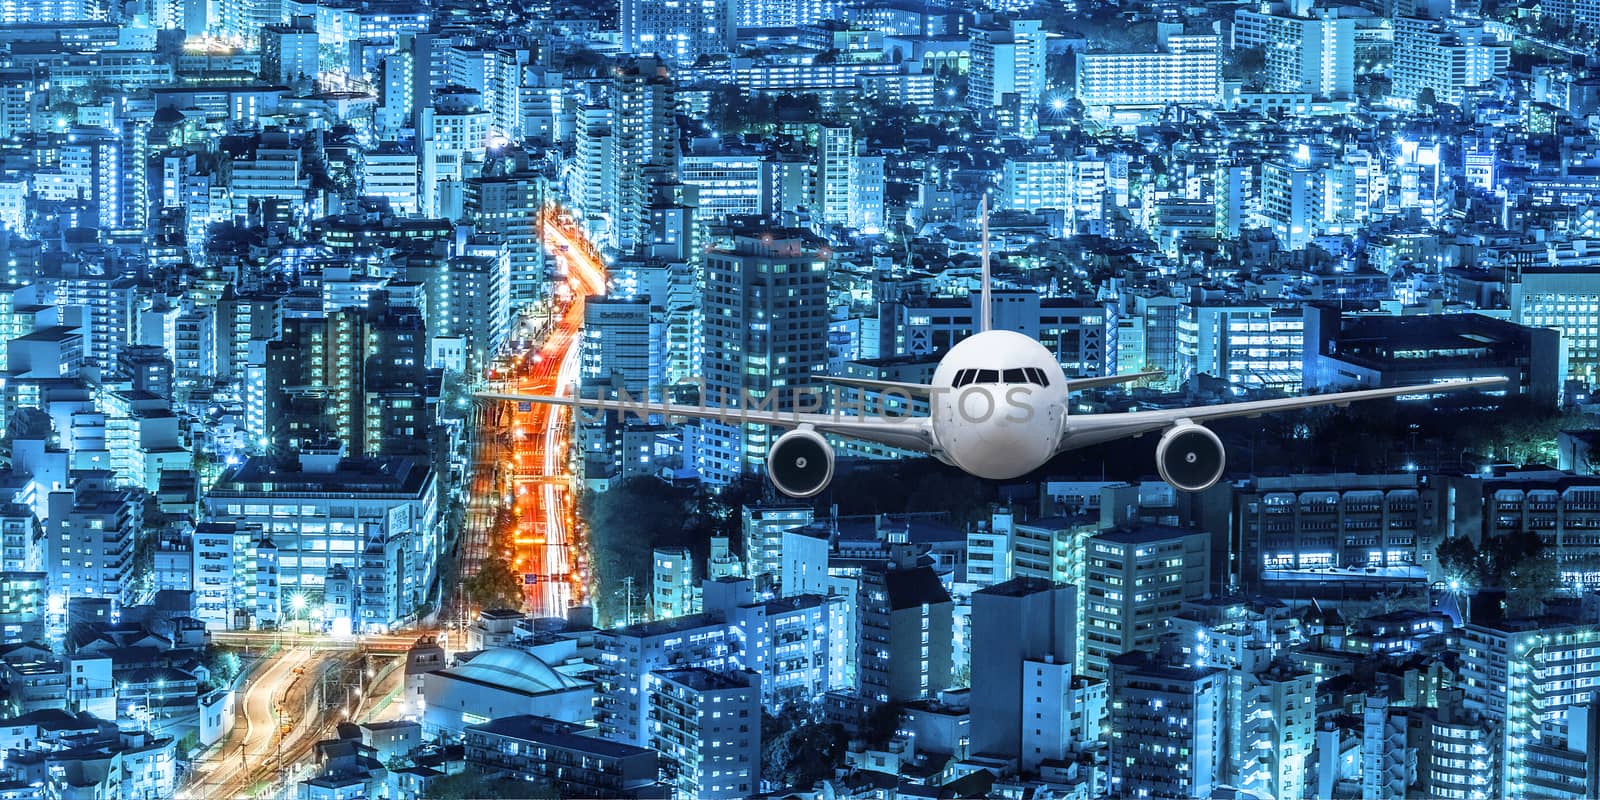 Airplane frying over the Japan cityscape background